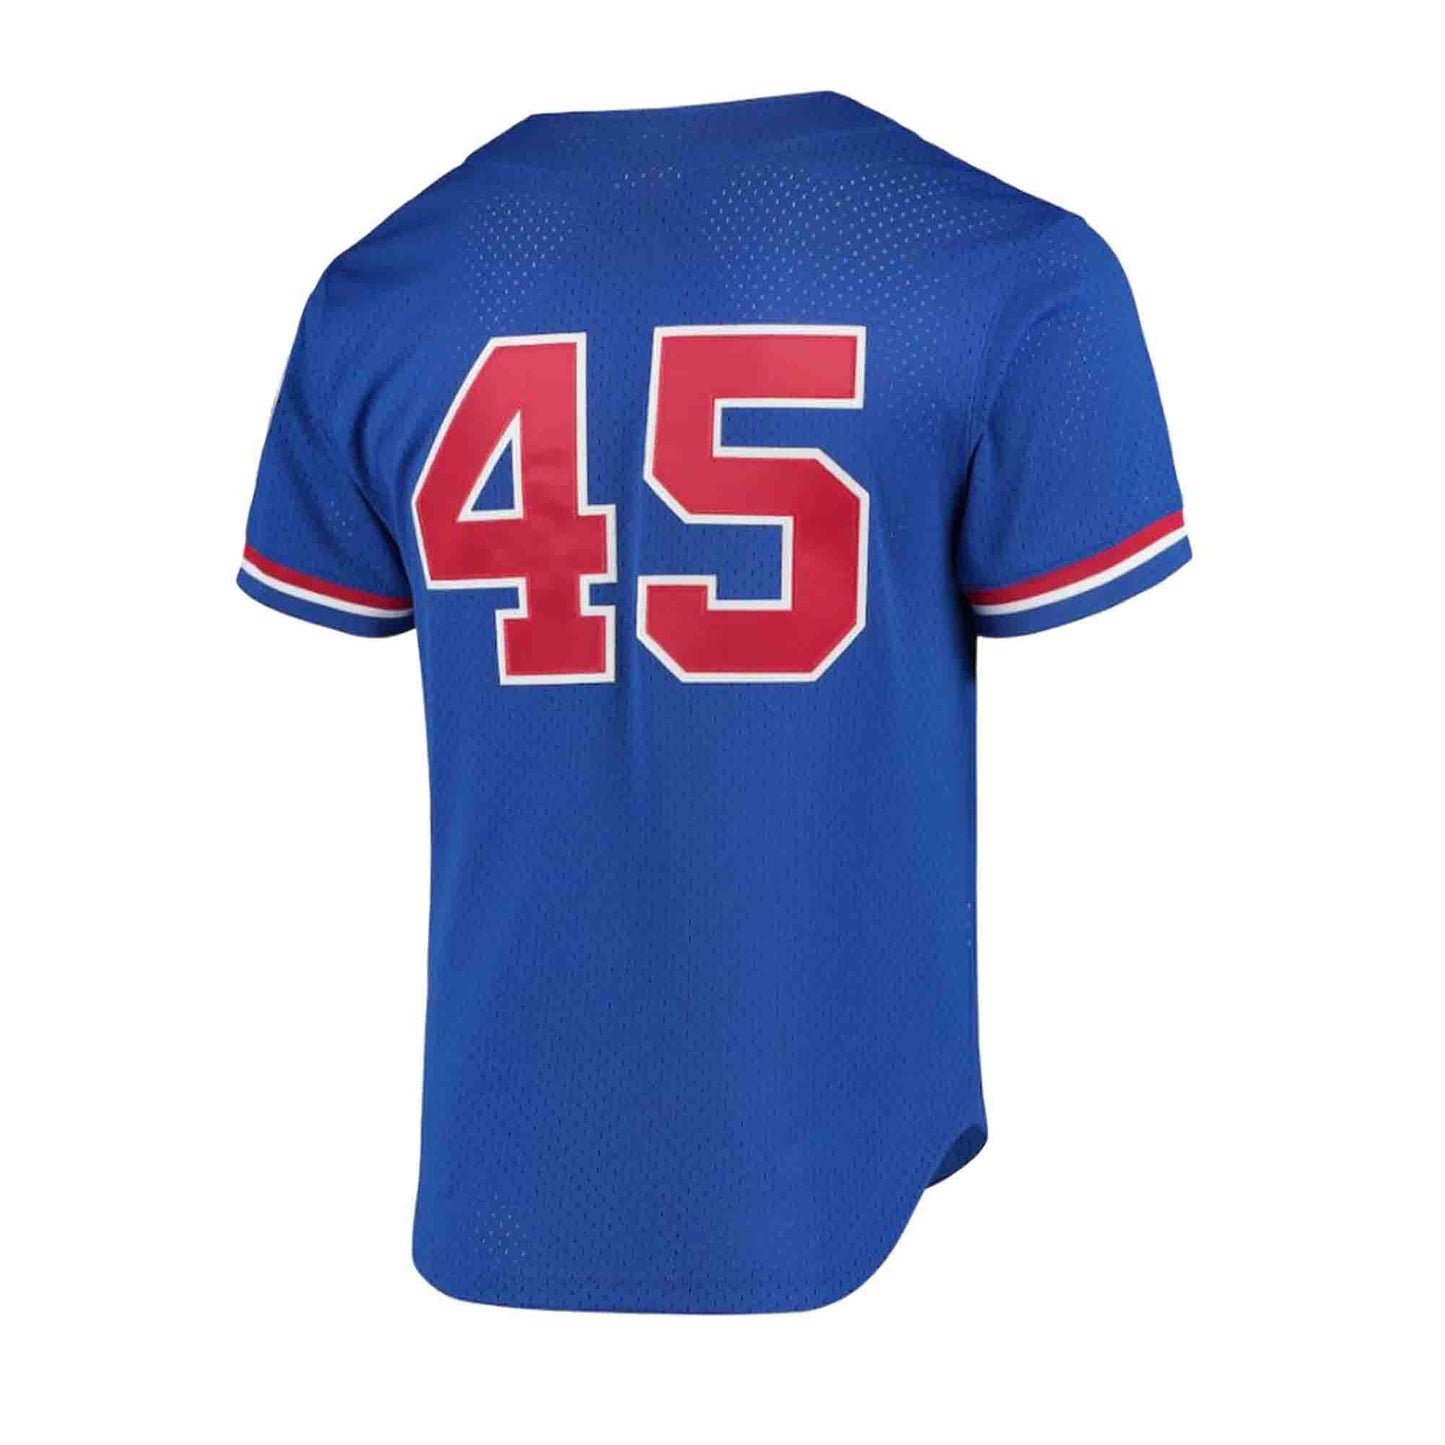 Ryne Sandberg #23 Chicago Cubs White Home Cooperstown Collection Jersey -  Cheap MLB Baseball Jerseys